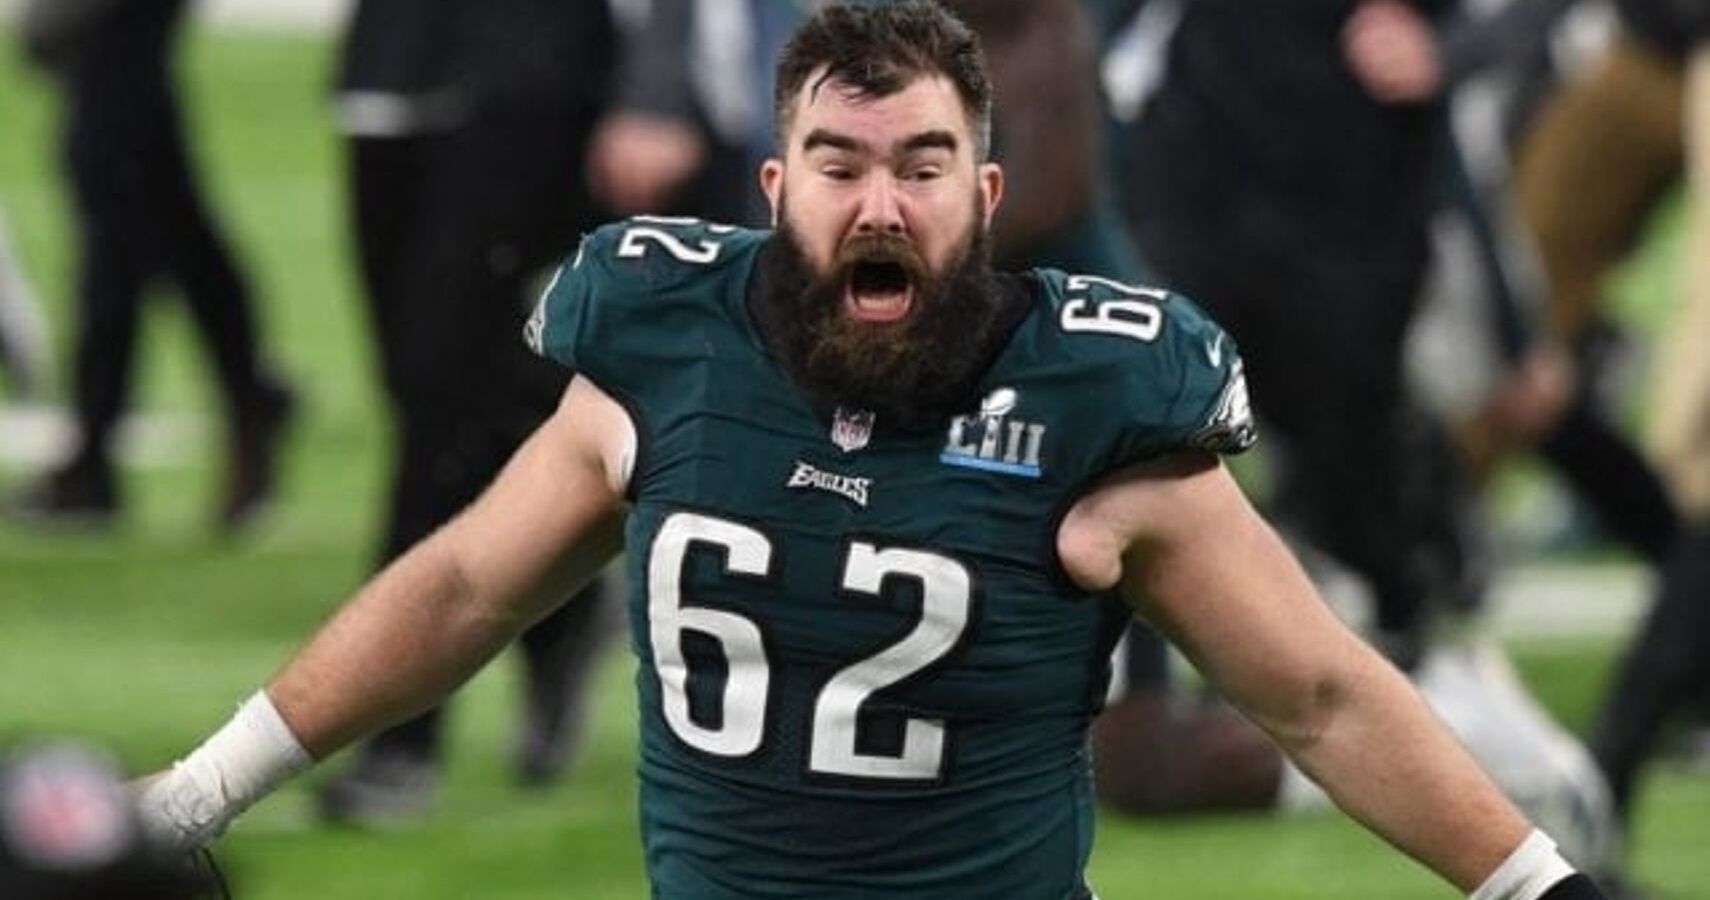 Philadelphia Eagles Offensive Lineman Jason Kelce And His Wife Kylie Welcome A Baby Girl